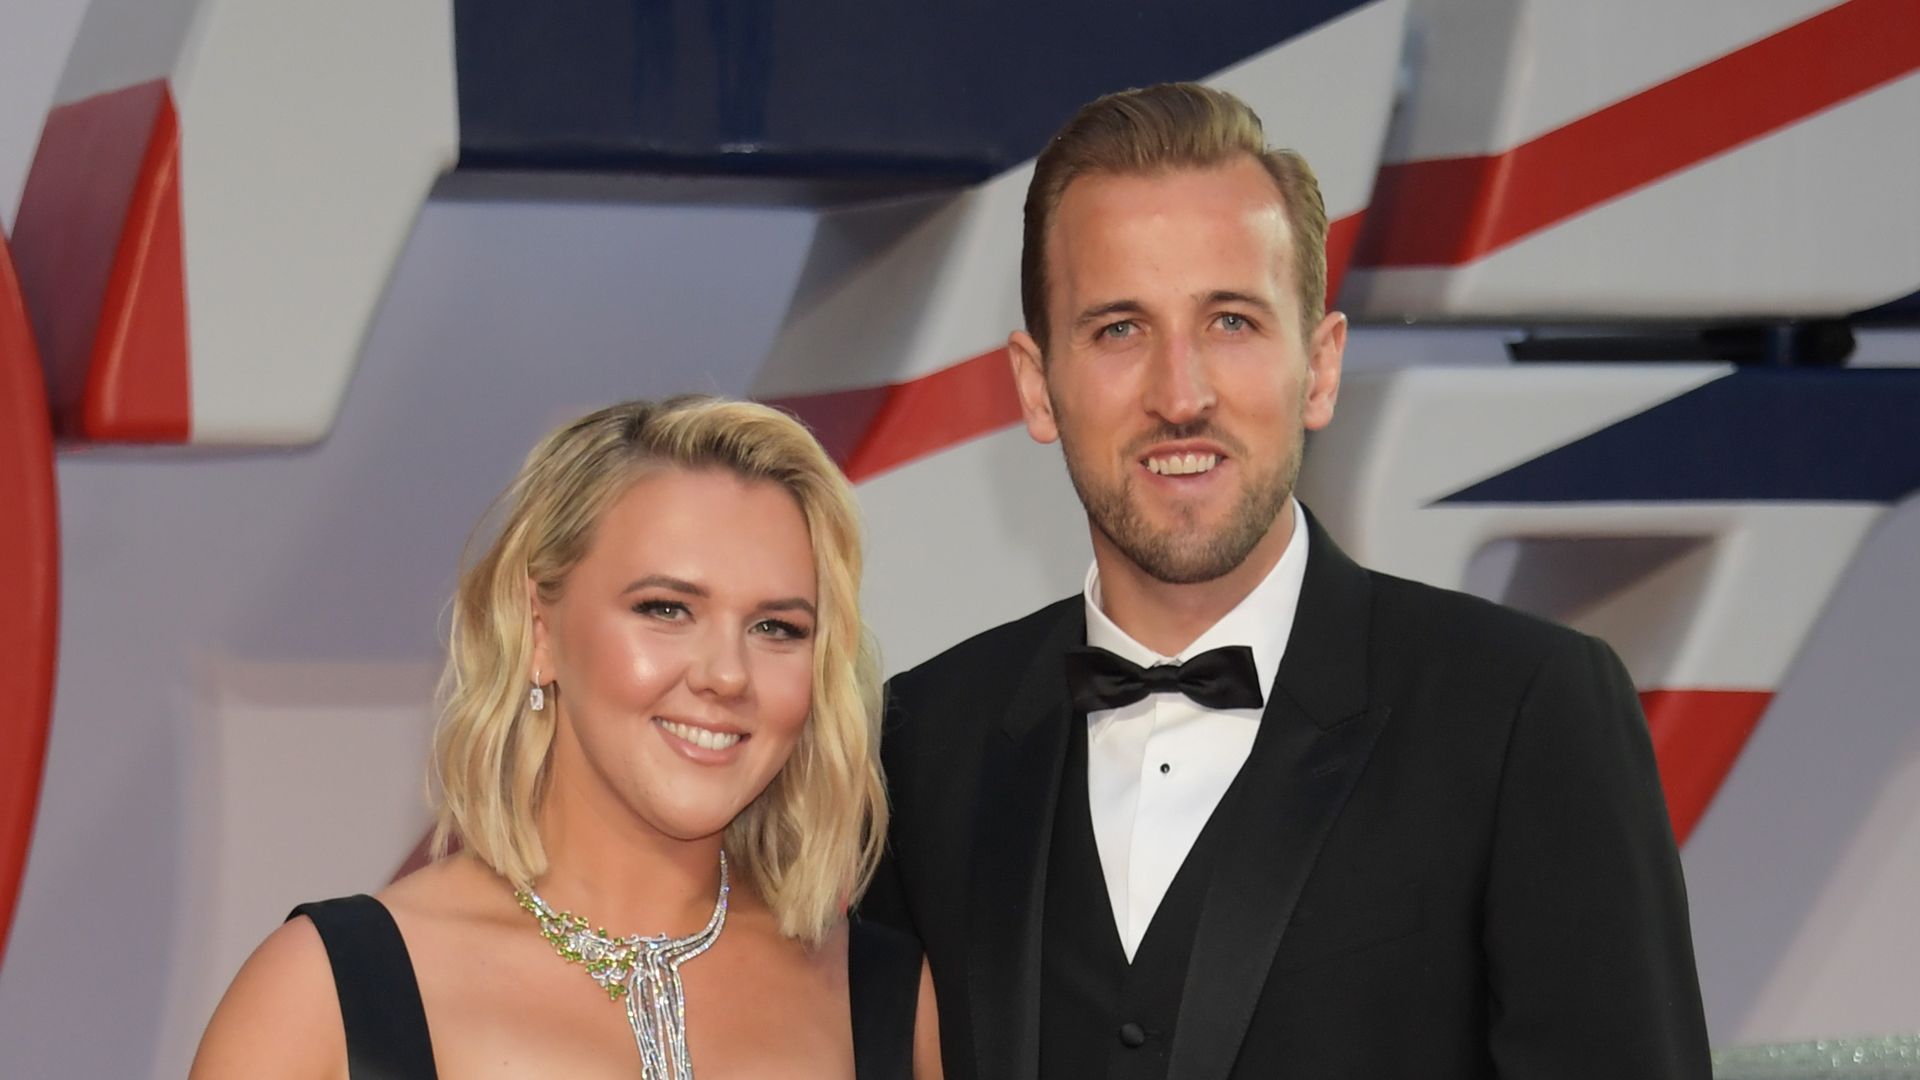 Kate Goodland and Harry Kane in black outfits